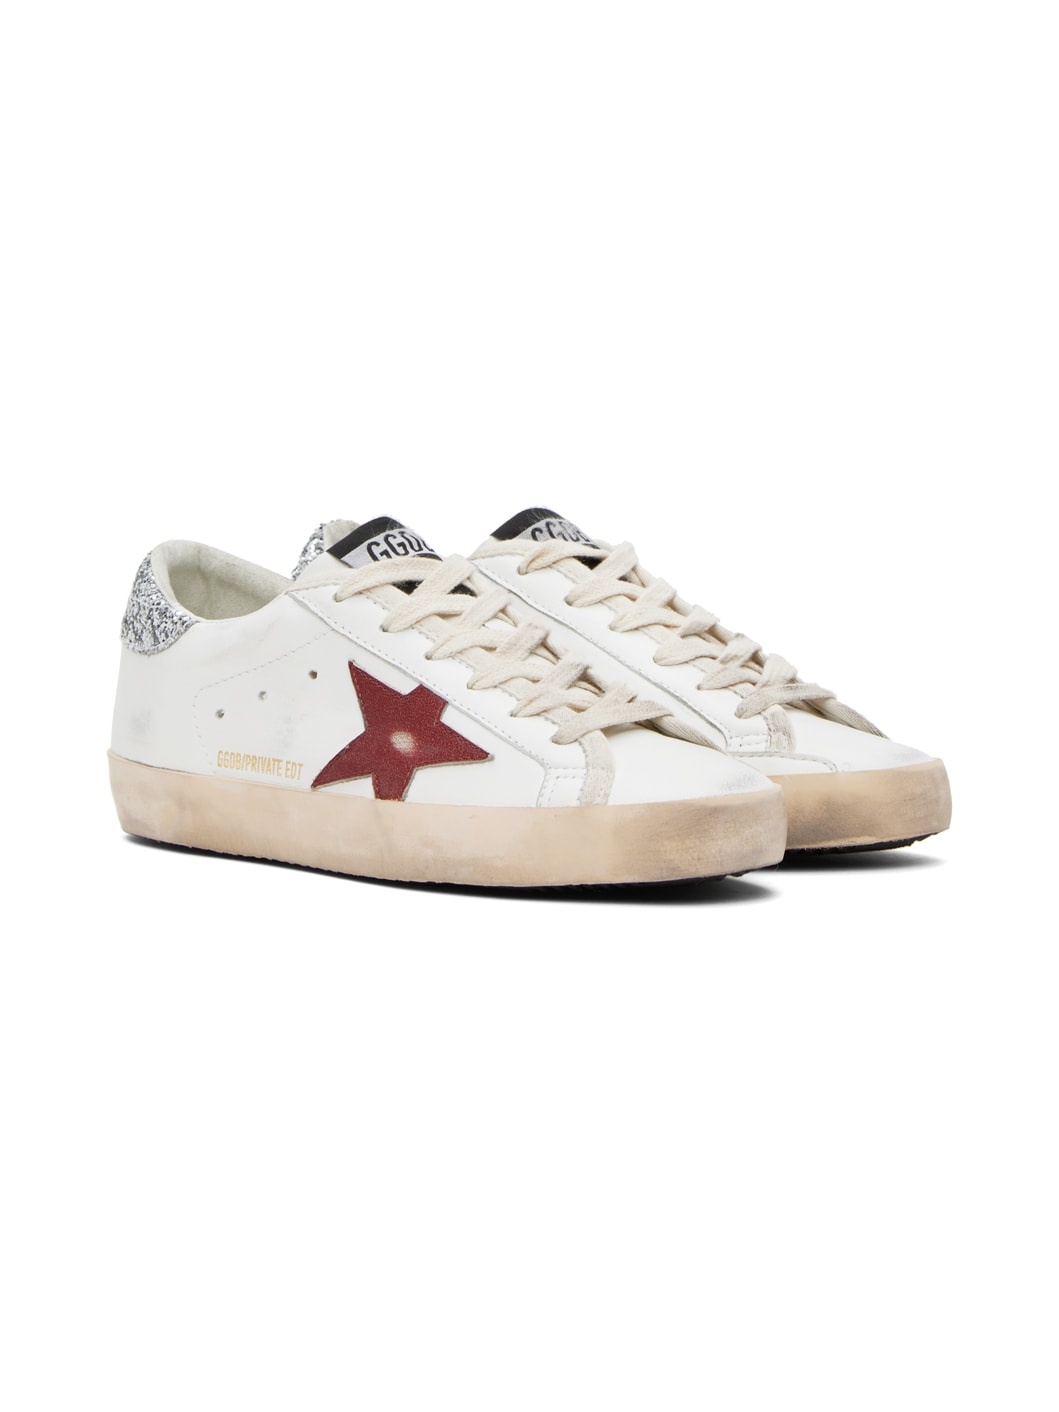 SSENSE Exclusive White Limited Edition Superstar Sneakers - 4